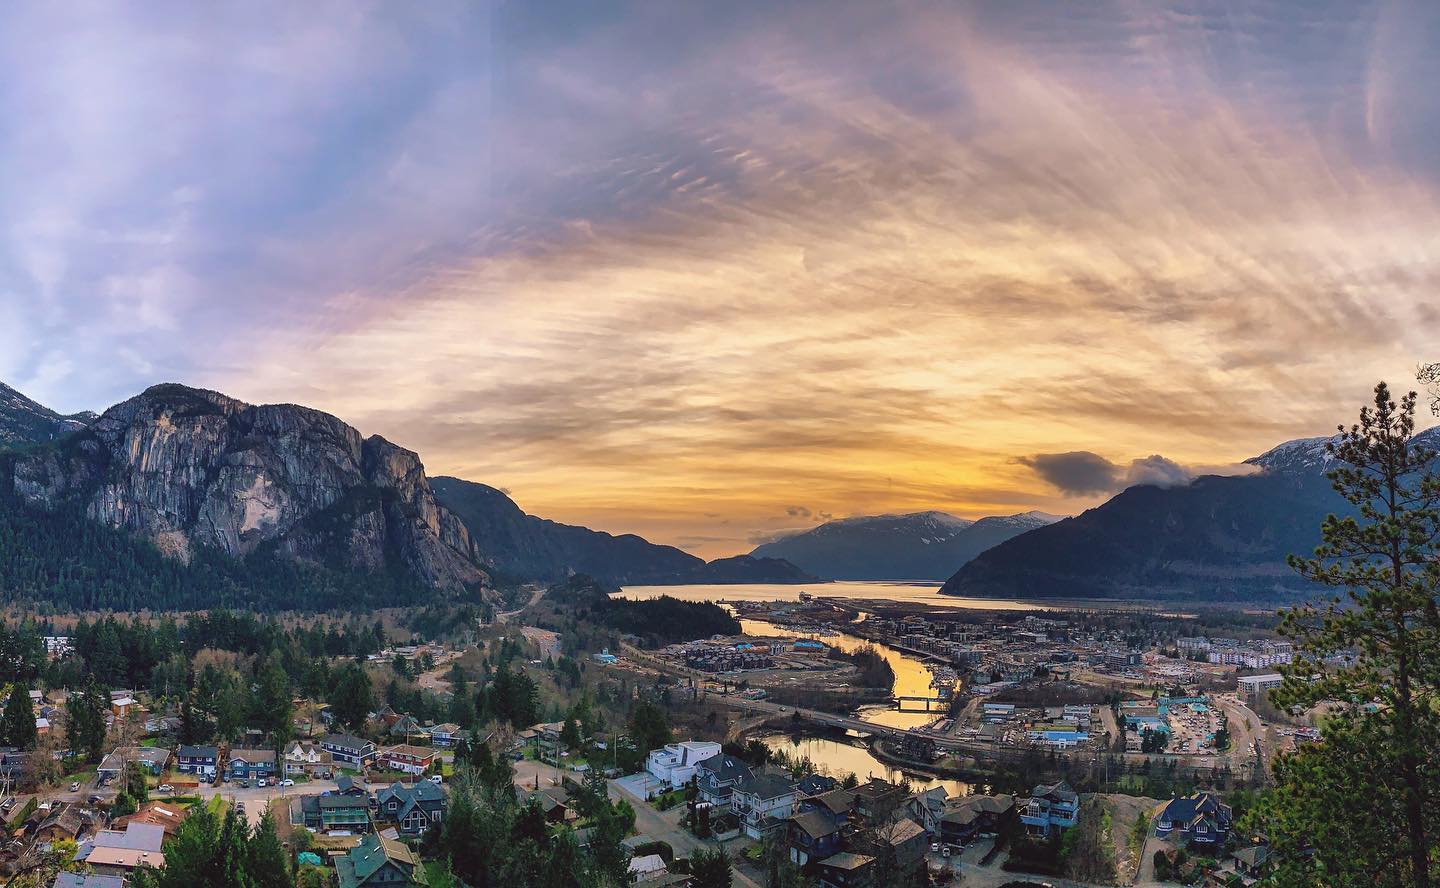 7 Epic Places to Watch The Sunset in Squamish | Tourism Squamish